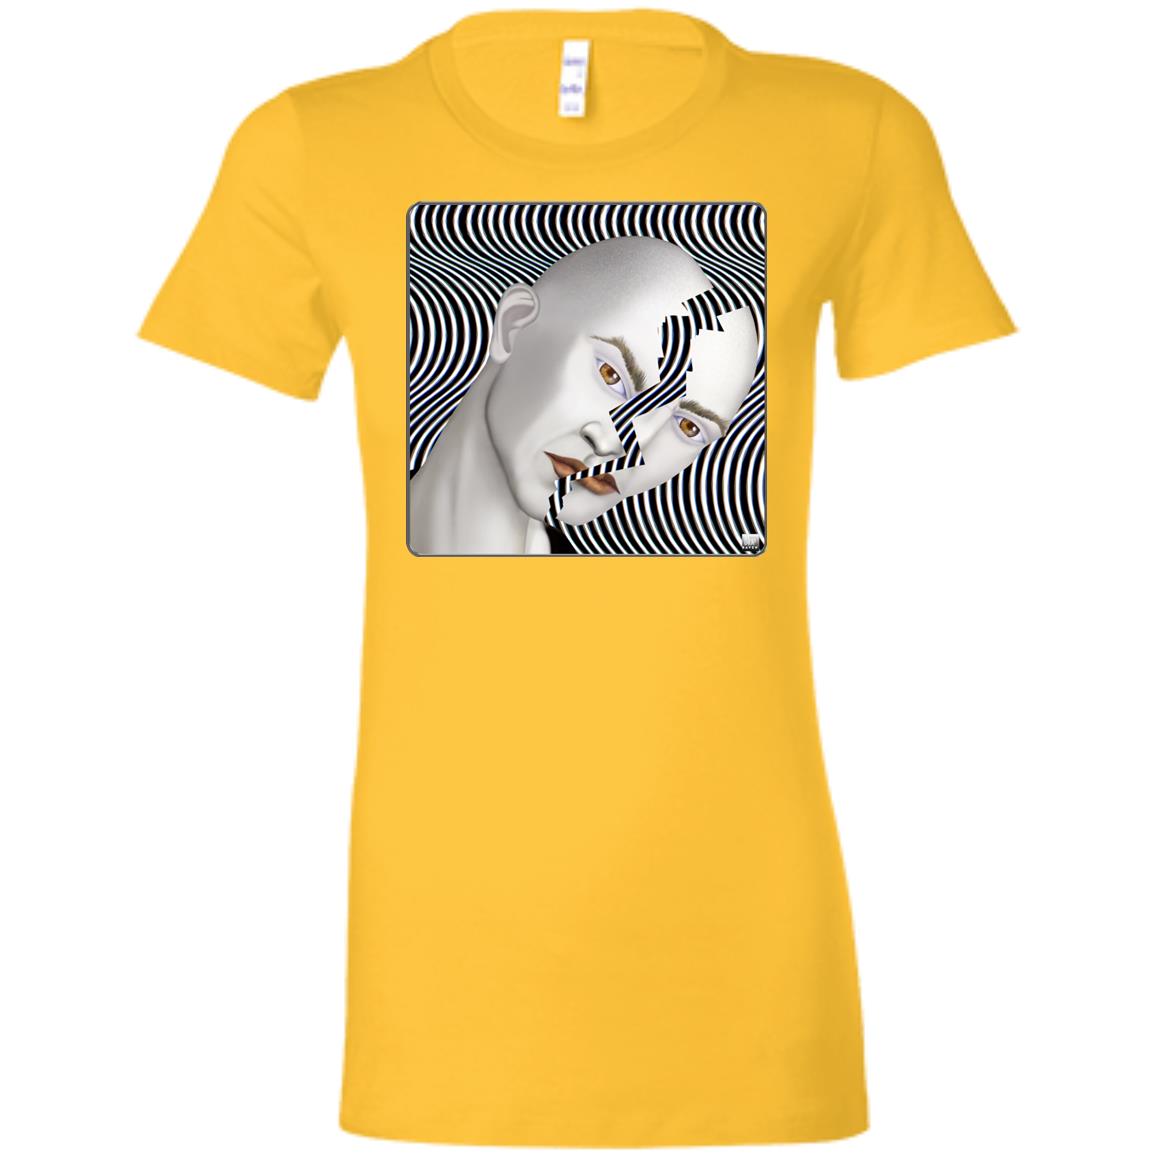 cracked until coffee - Women's Fitted T-Shirt